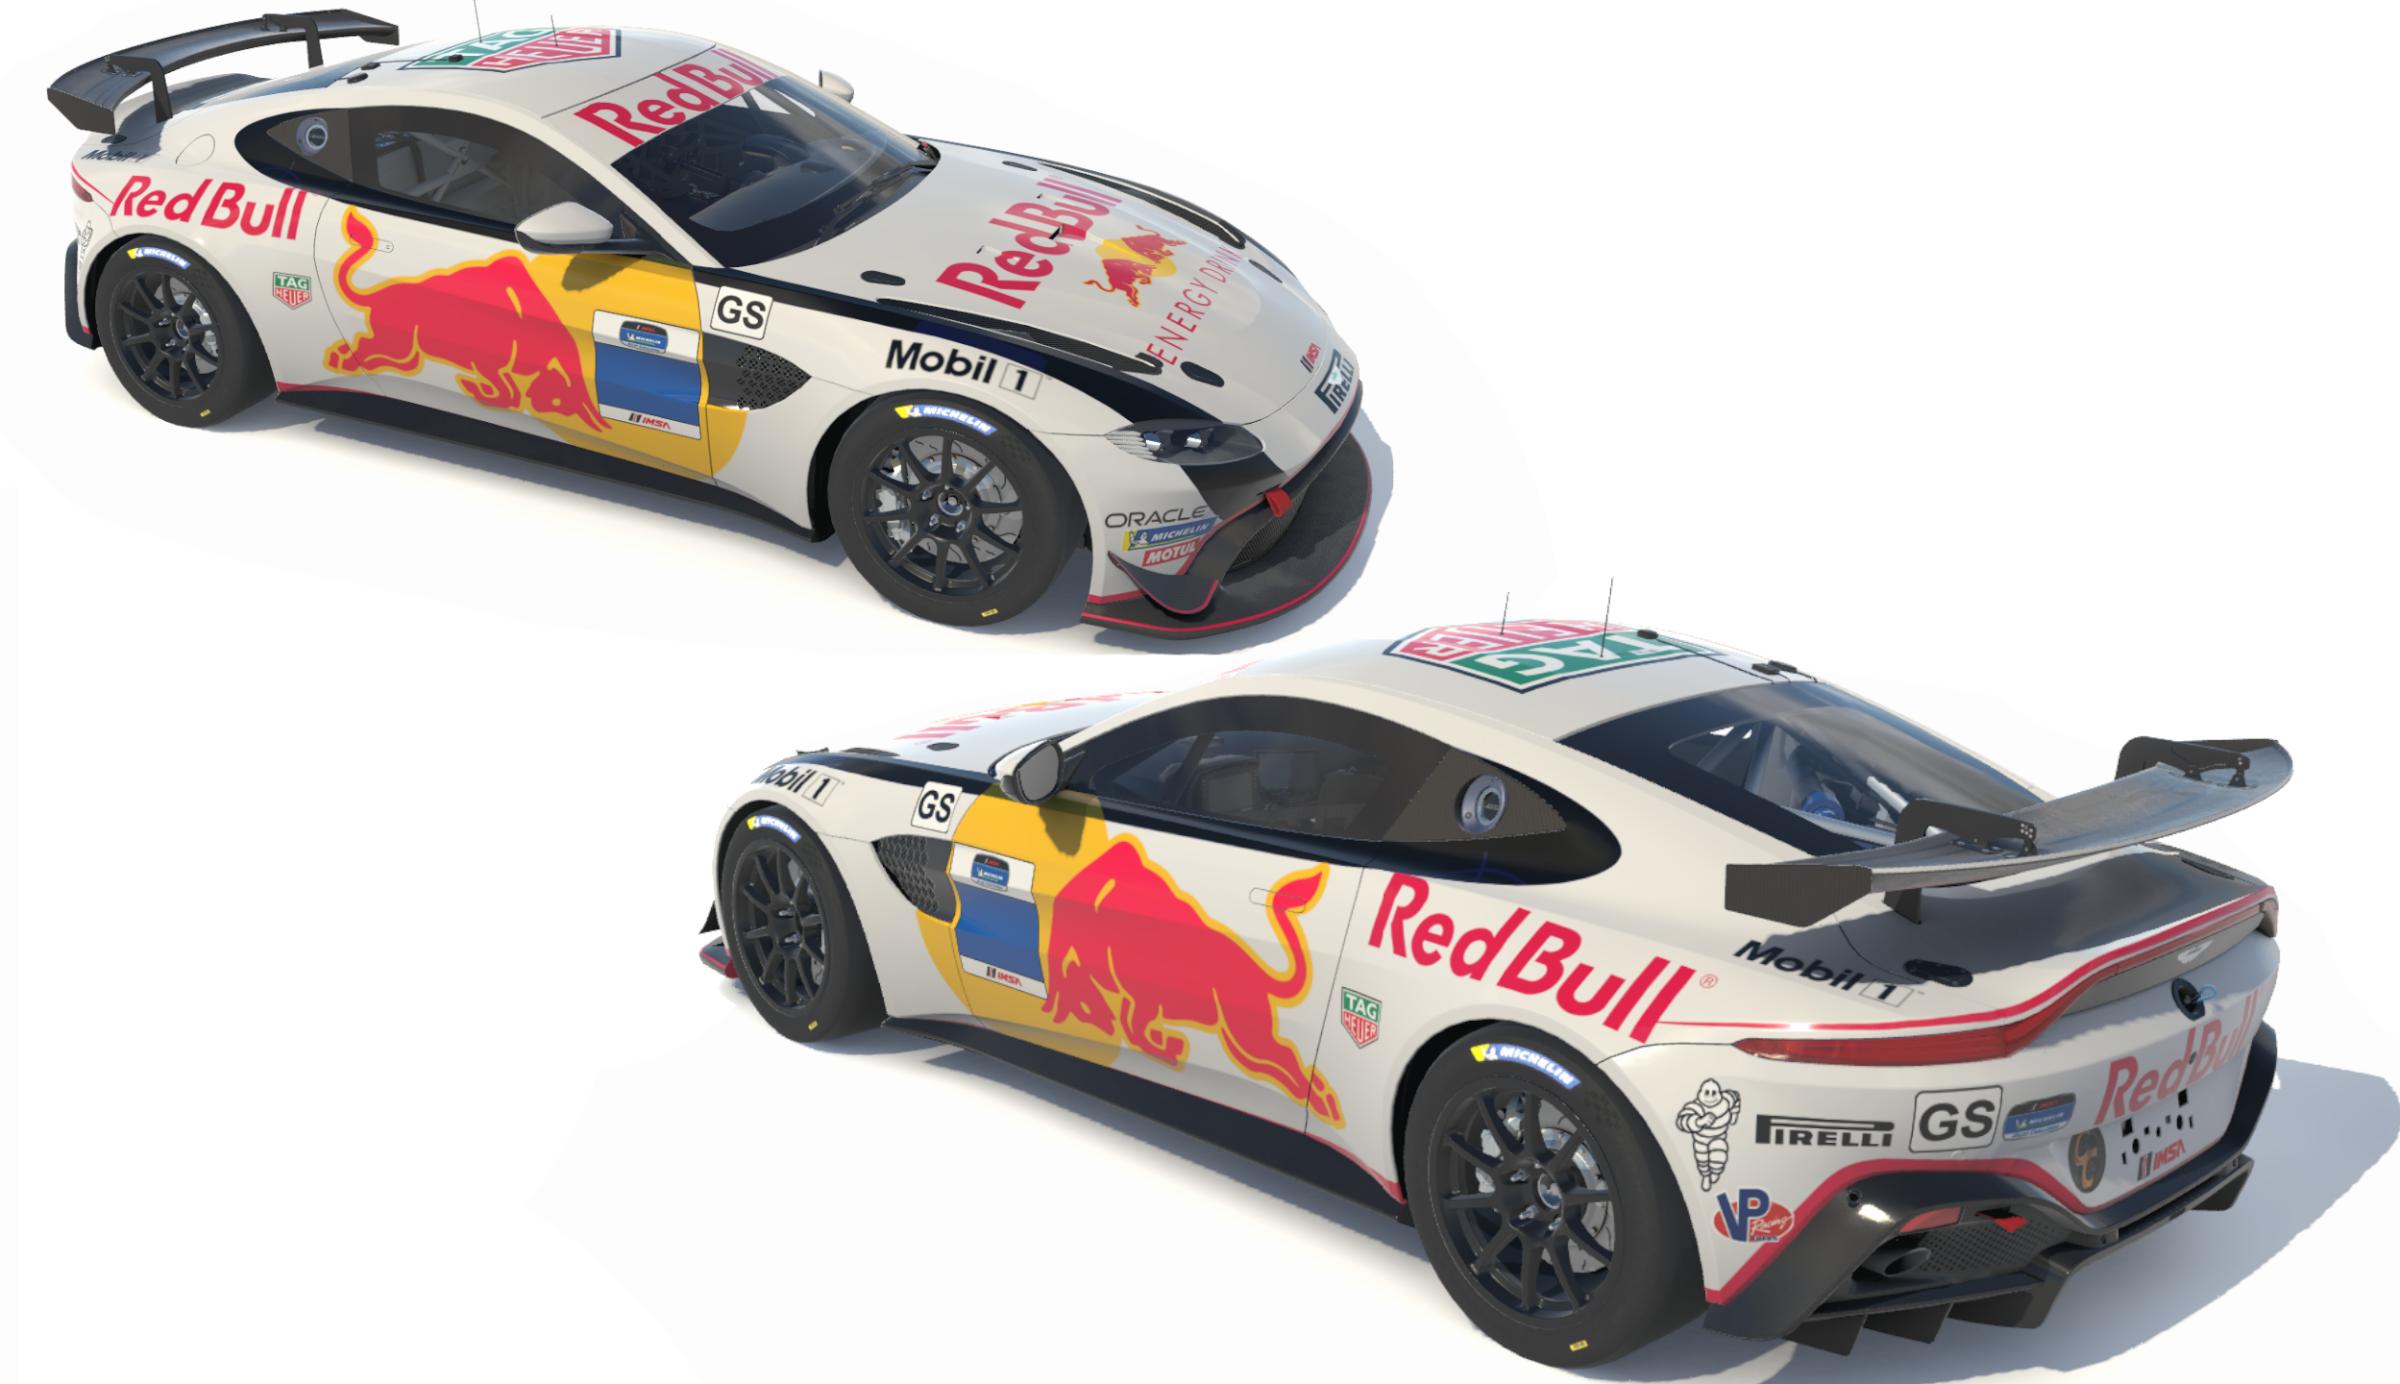 Preview of Aston Martin Vantage GT4 Redbull by Alan H.